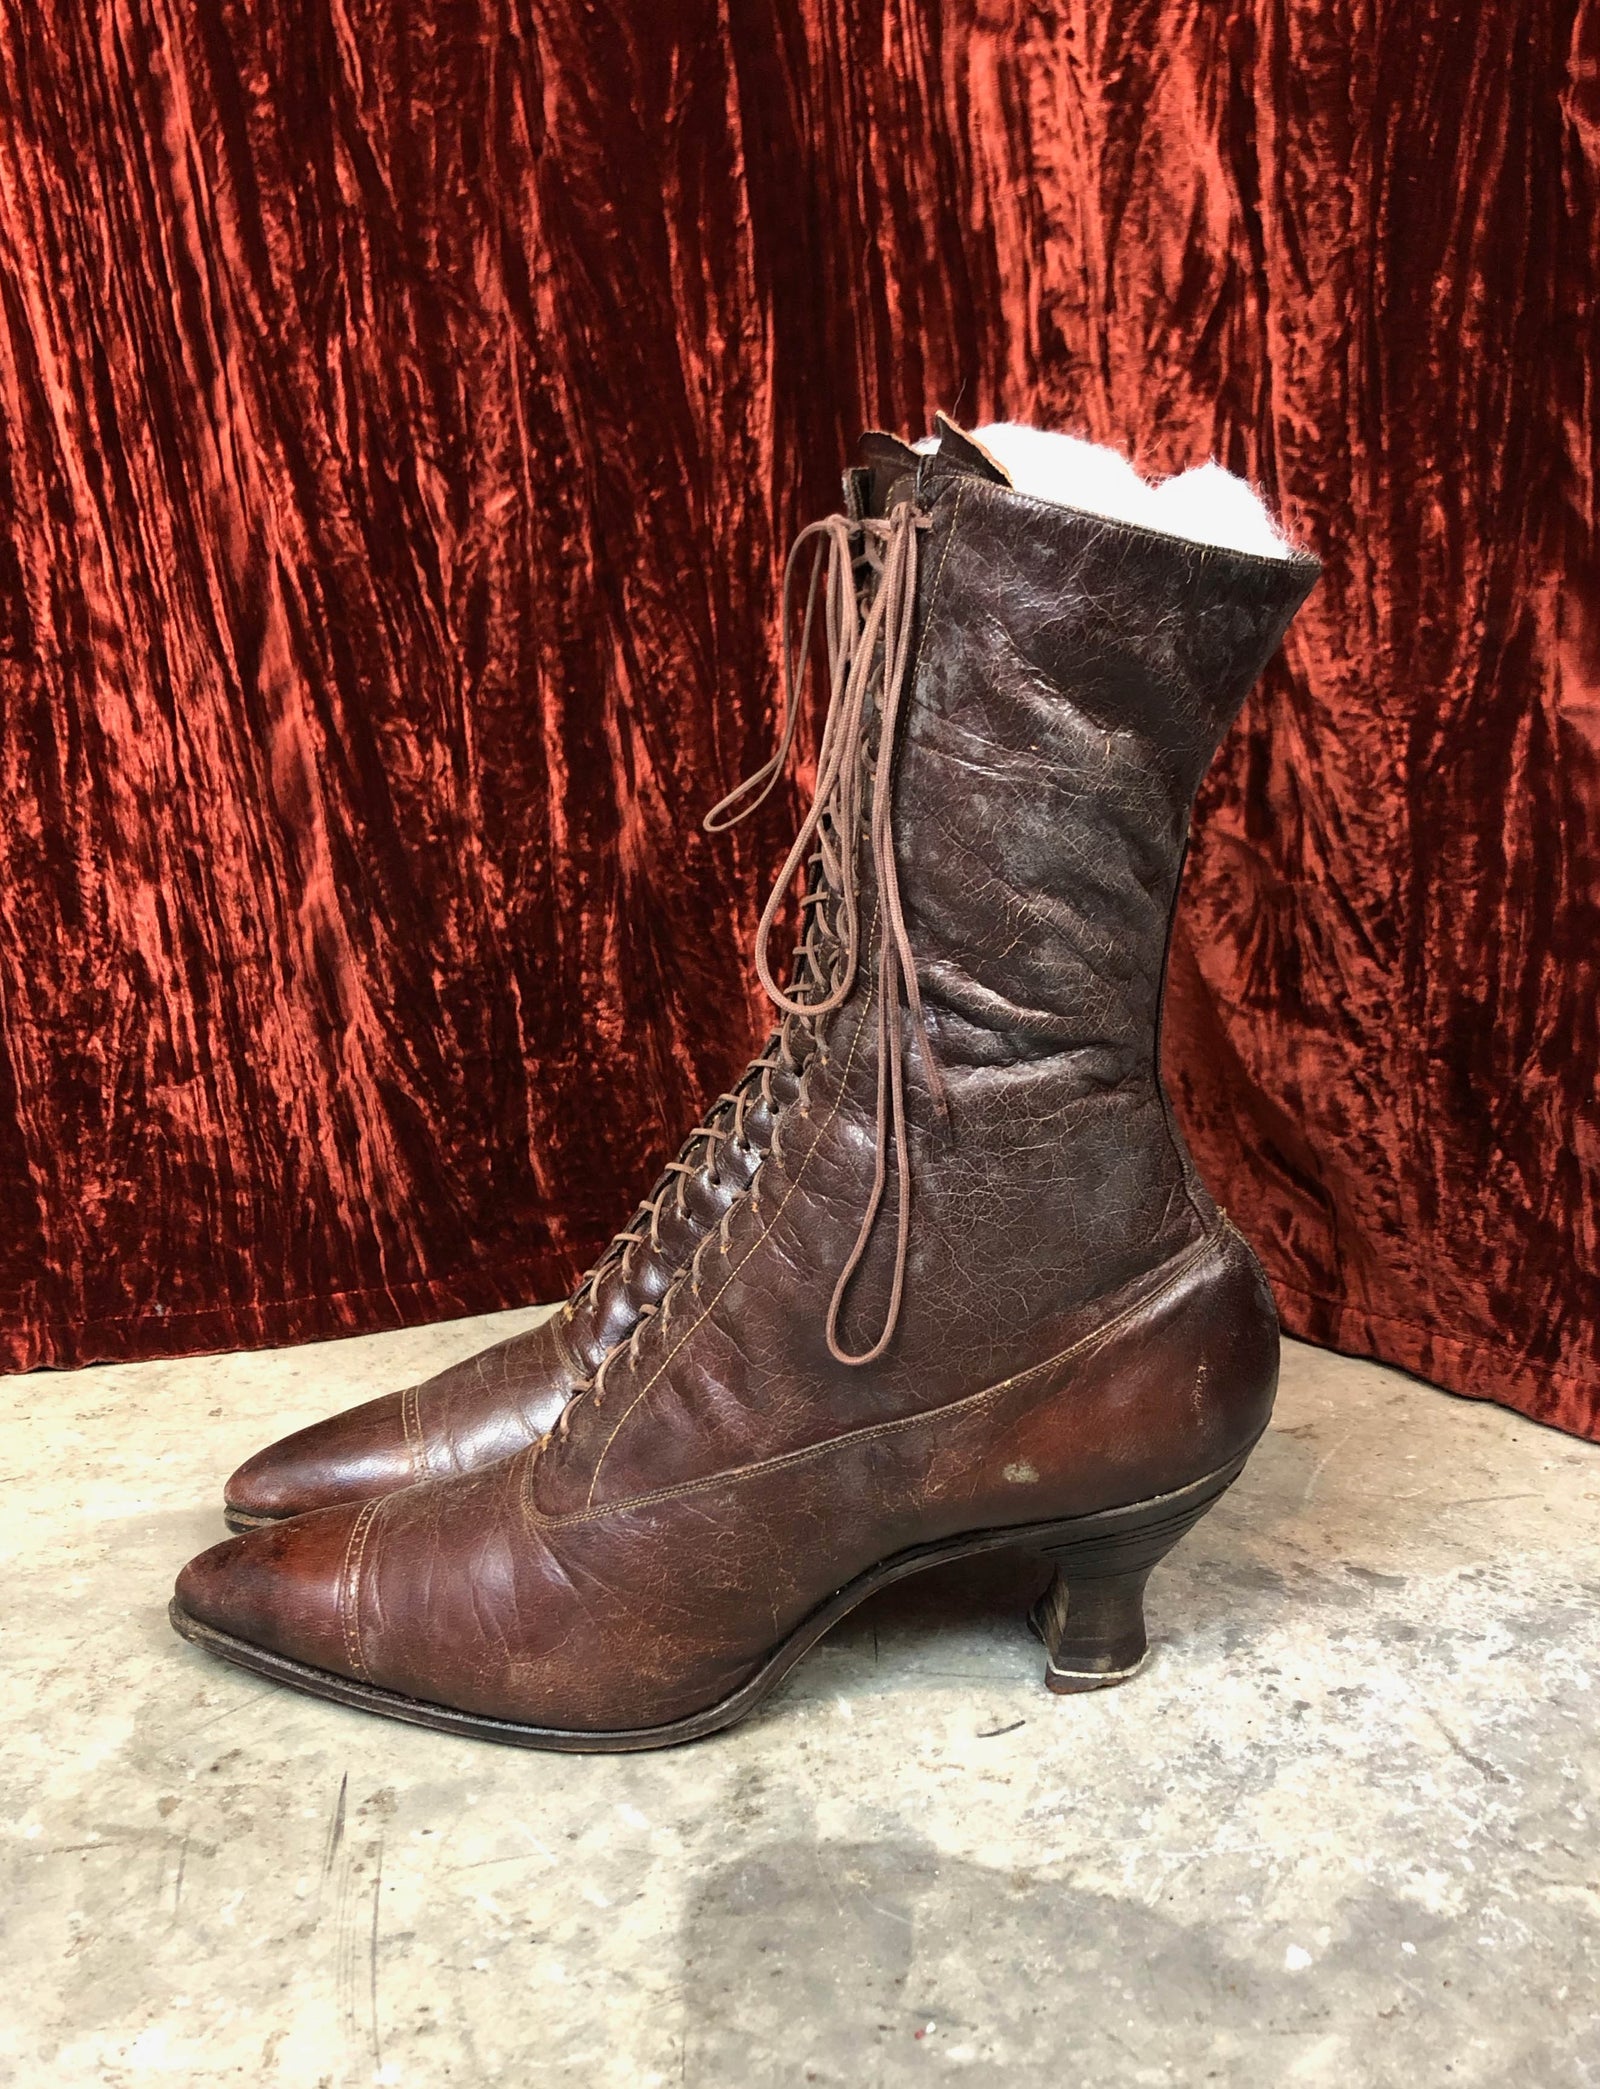 Antique Lace up Boots 1900s Edwardian Victorian Brown 